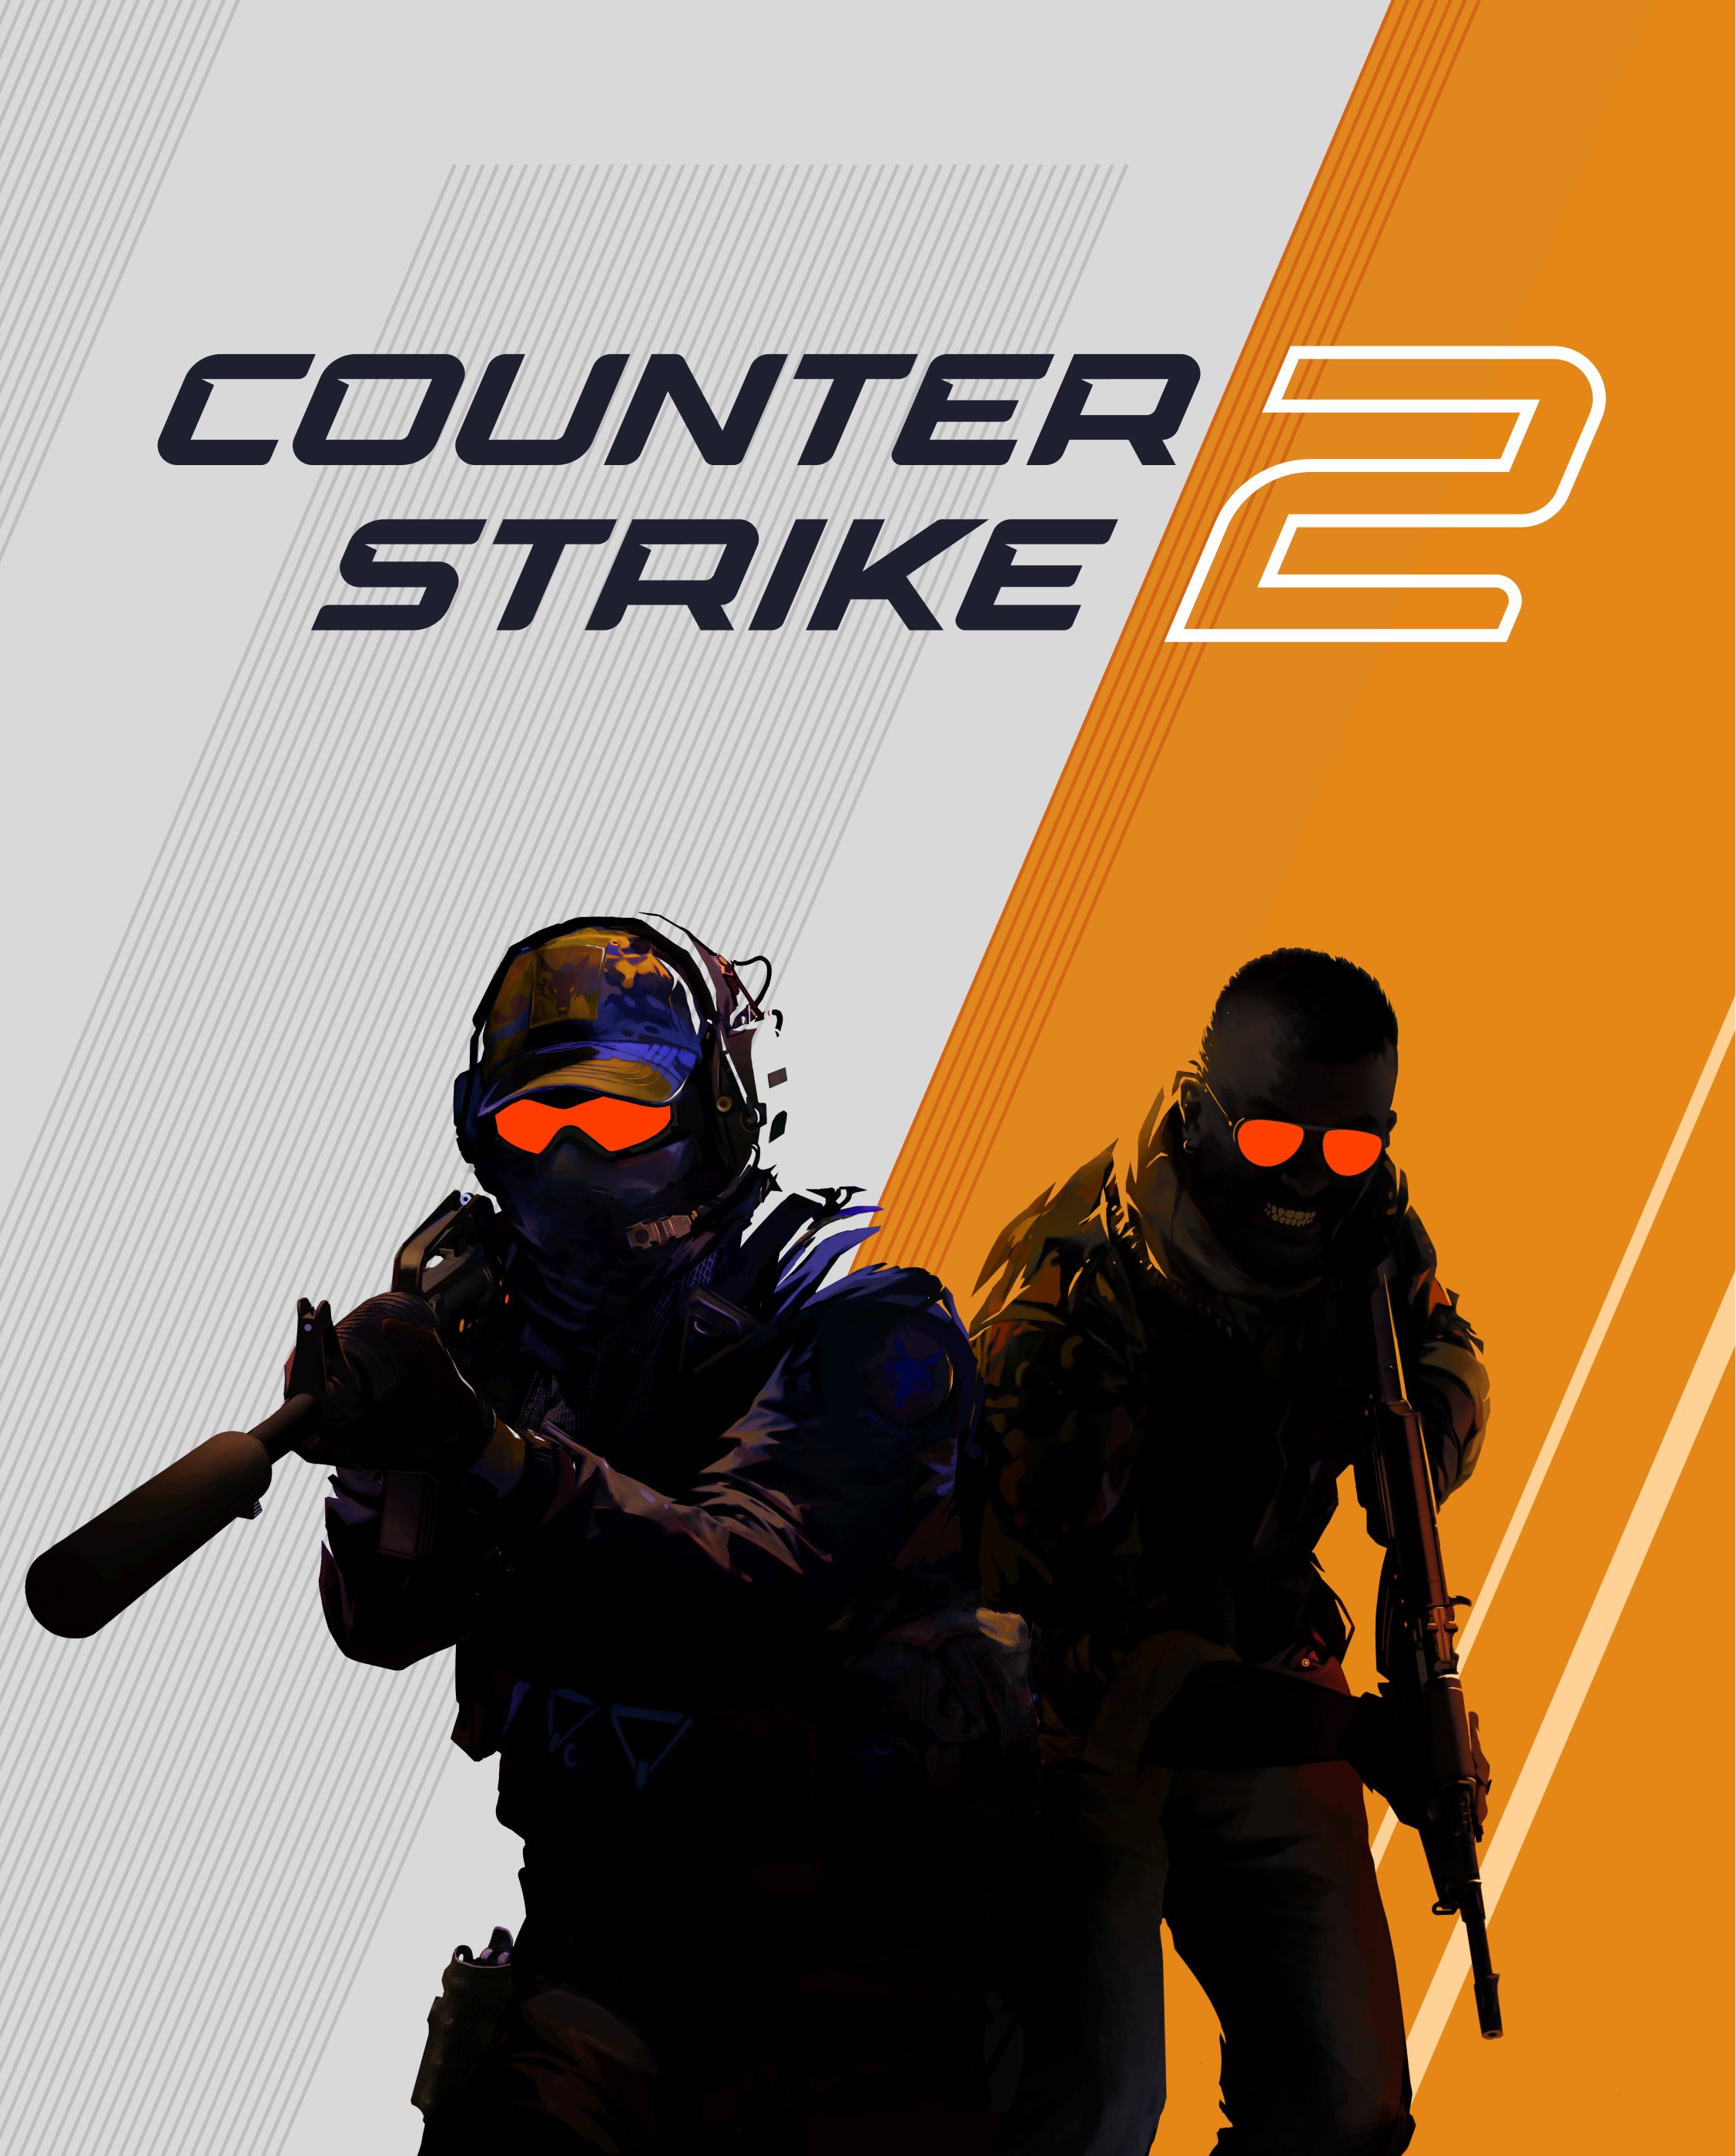 Counter-Strike 2 announced, coming summer 2023 - Polygon